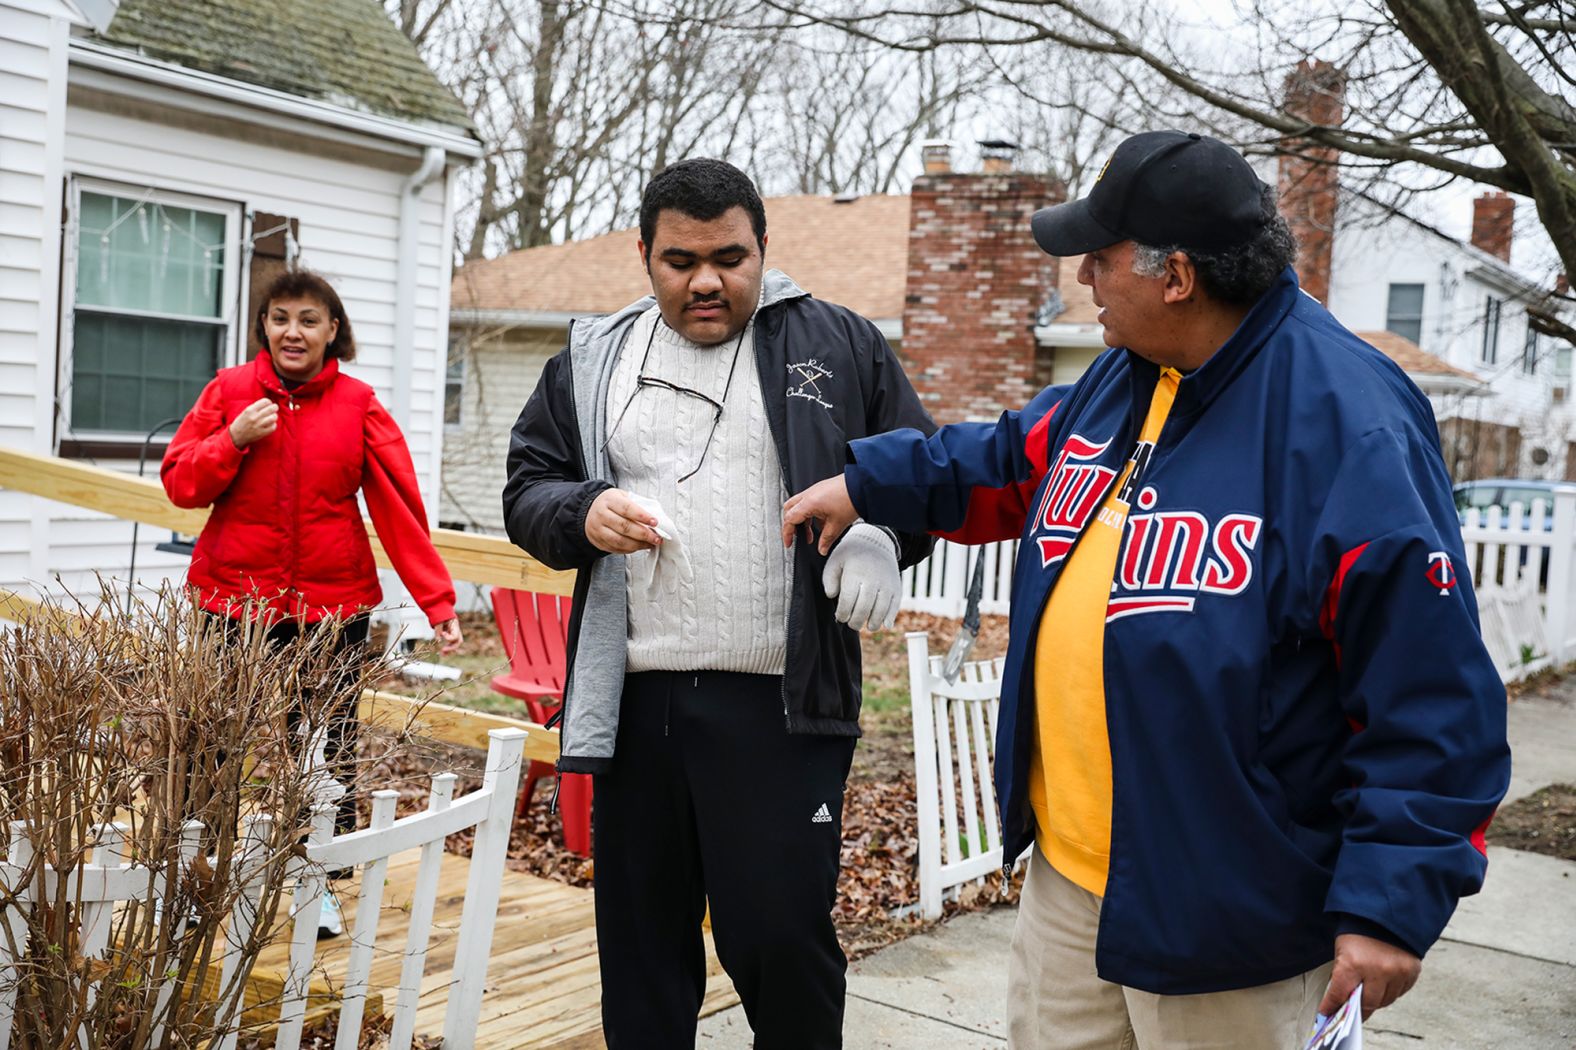 Lisa Kincade, left, stands with her son Willie as her husband, Mike, adjusts Willie's coat in front of their home in Roslindale, Massachusetts, on April 4. Willie, who has autism, was hoping to get his diploma this spring. But the pandemic made his future plans uncertain.